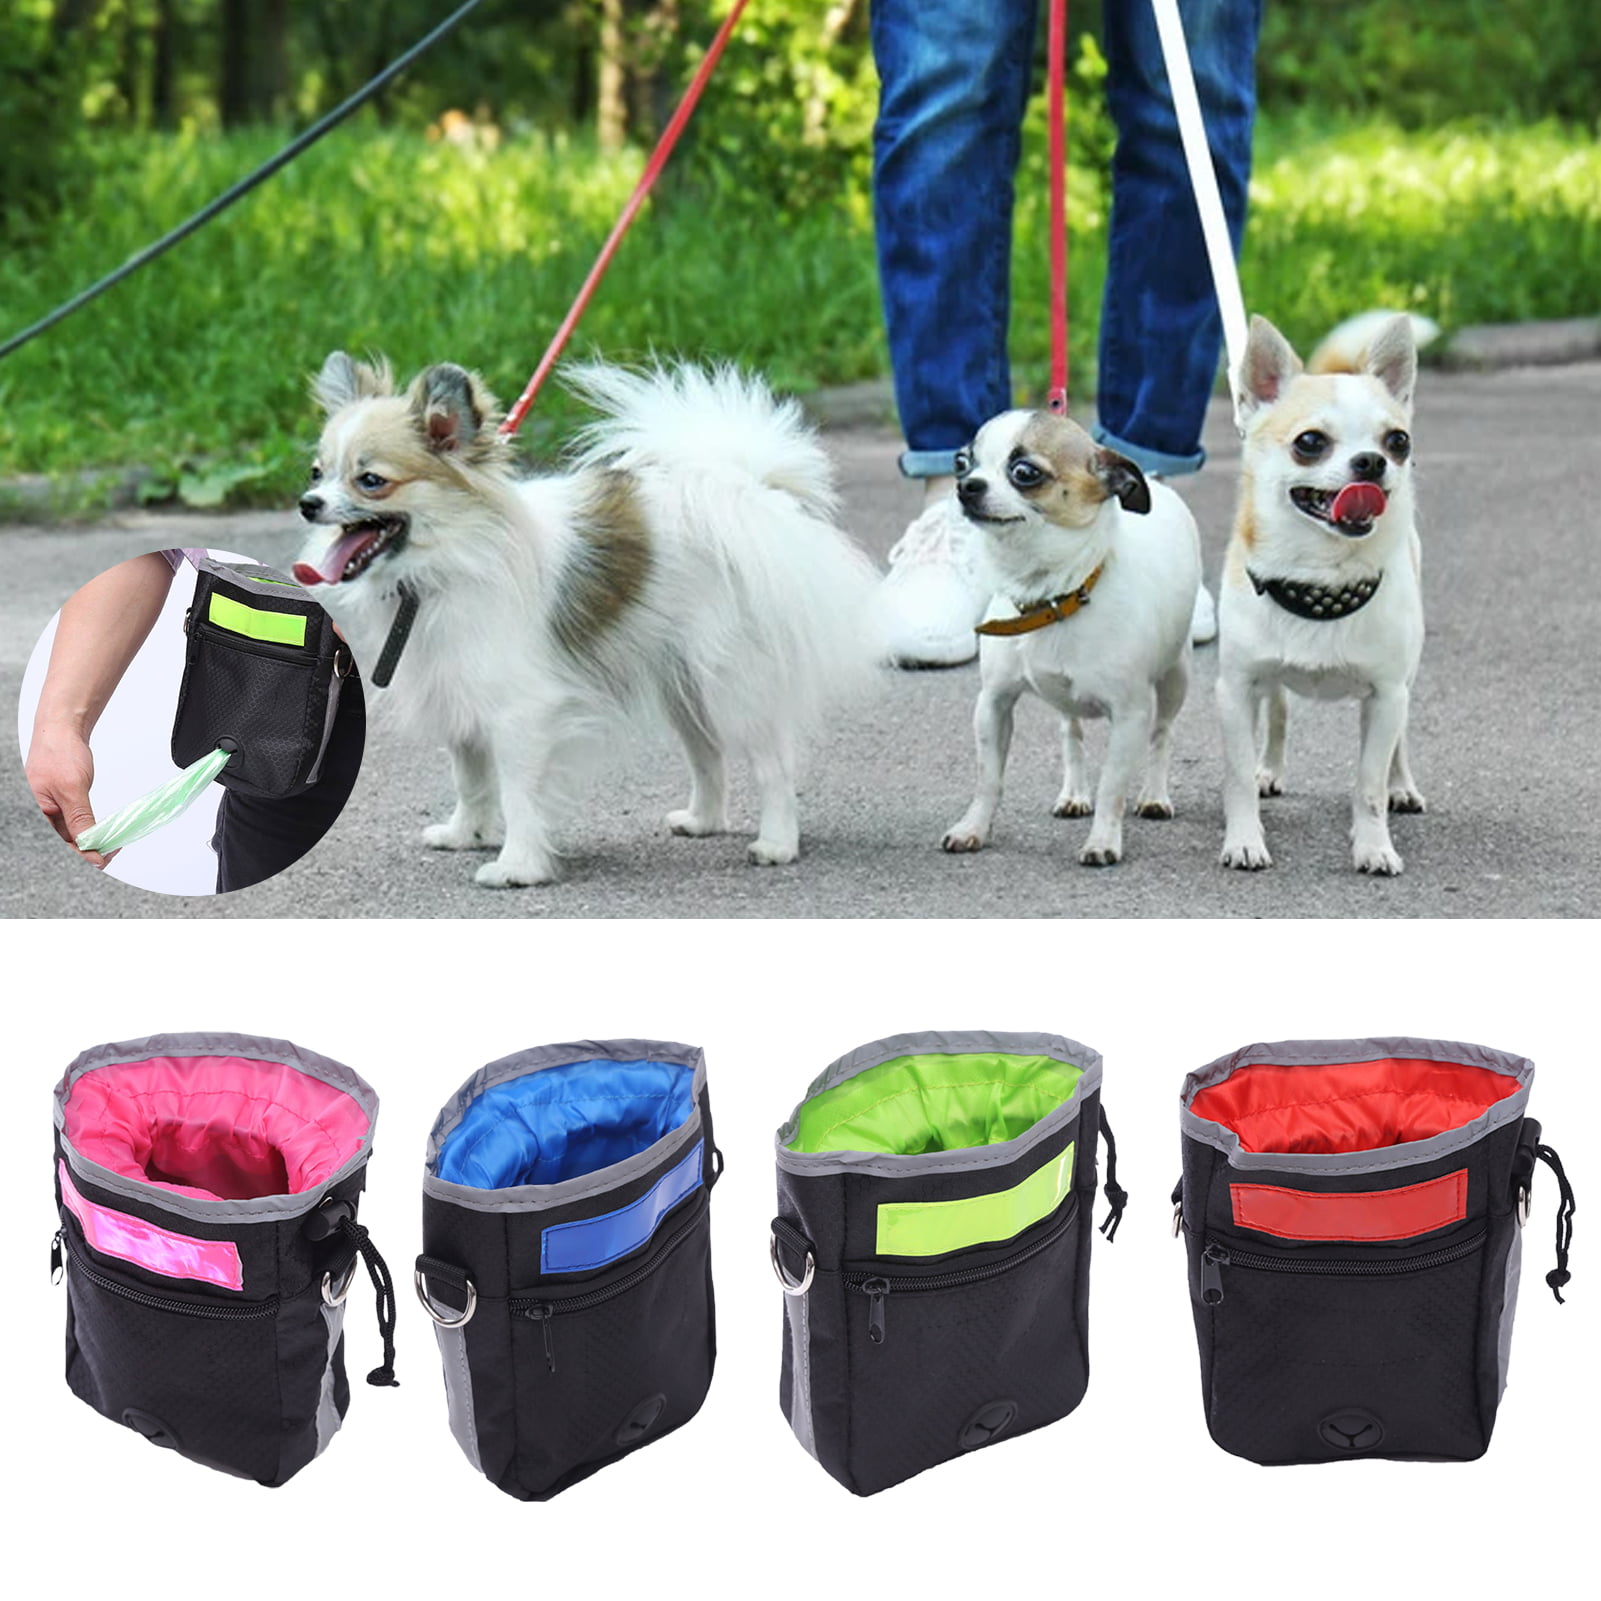 Mini Snack Bag easy close due to drawstring hook to attach lead/ belt show dogs 